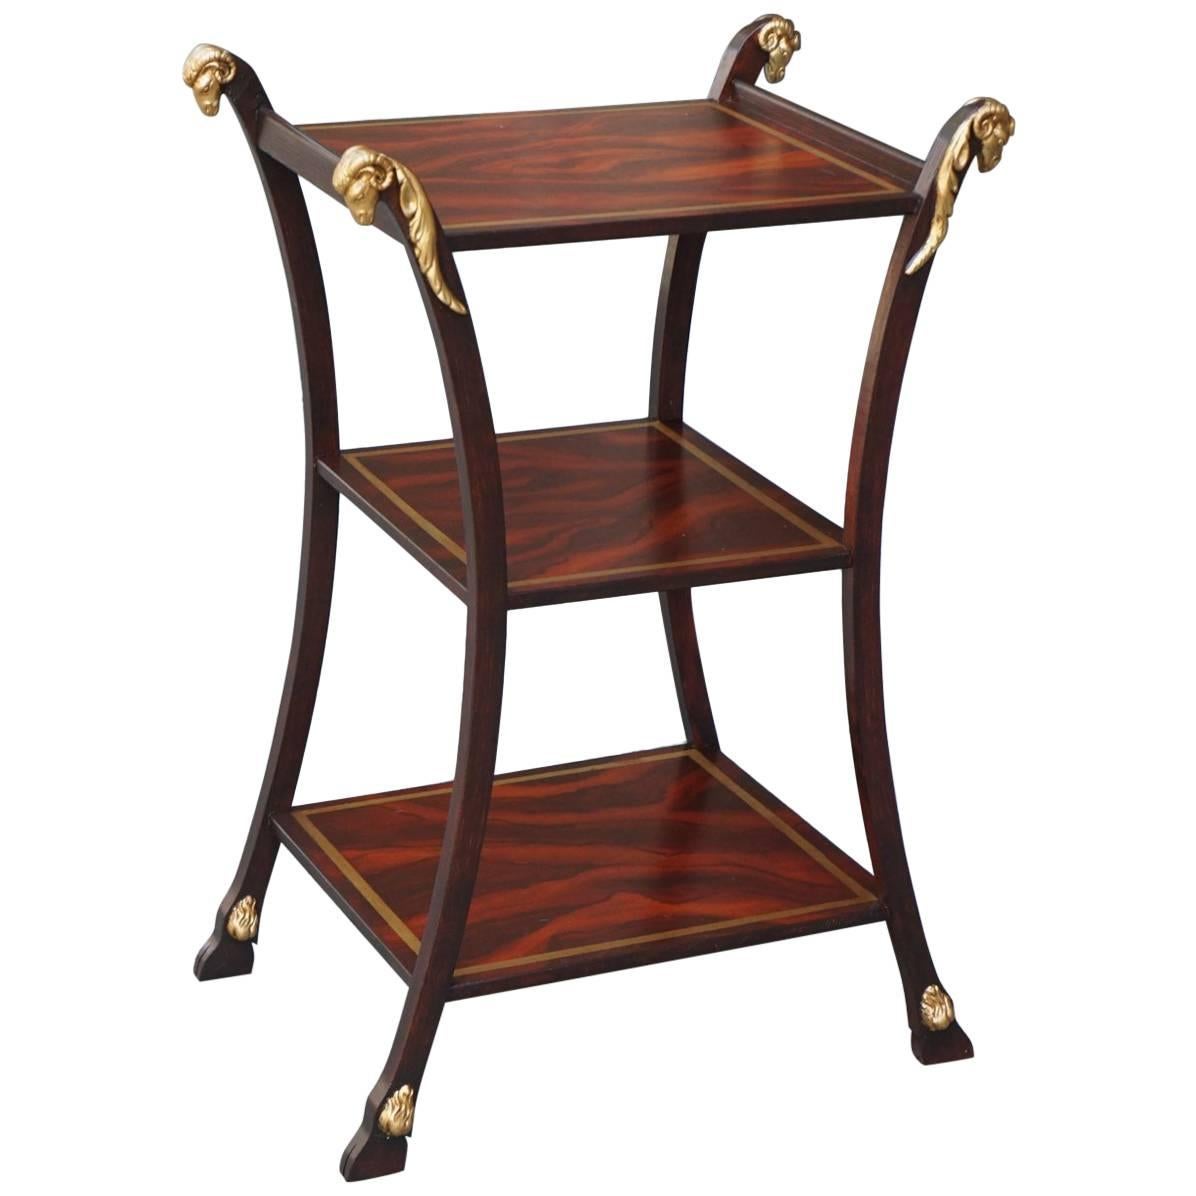 Regency Style Grain Painted and Gilded Three-tiered Table